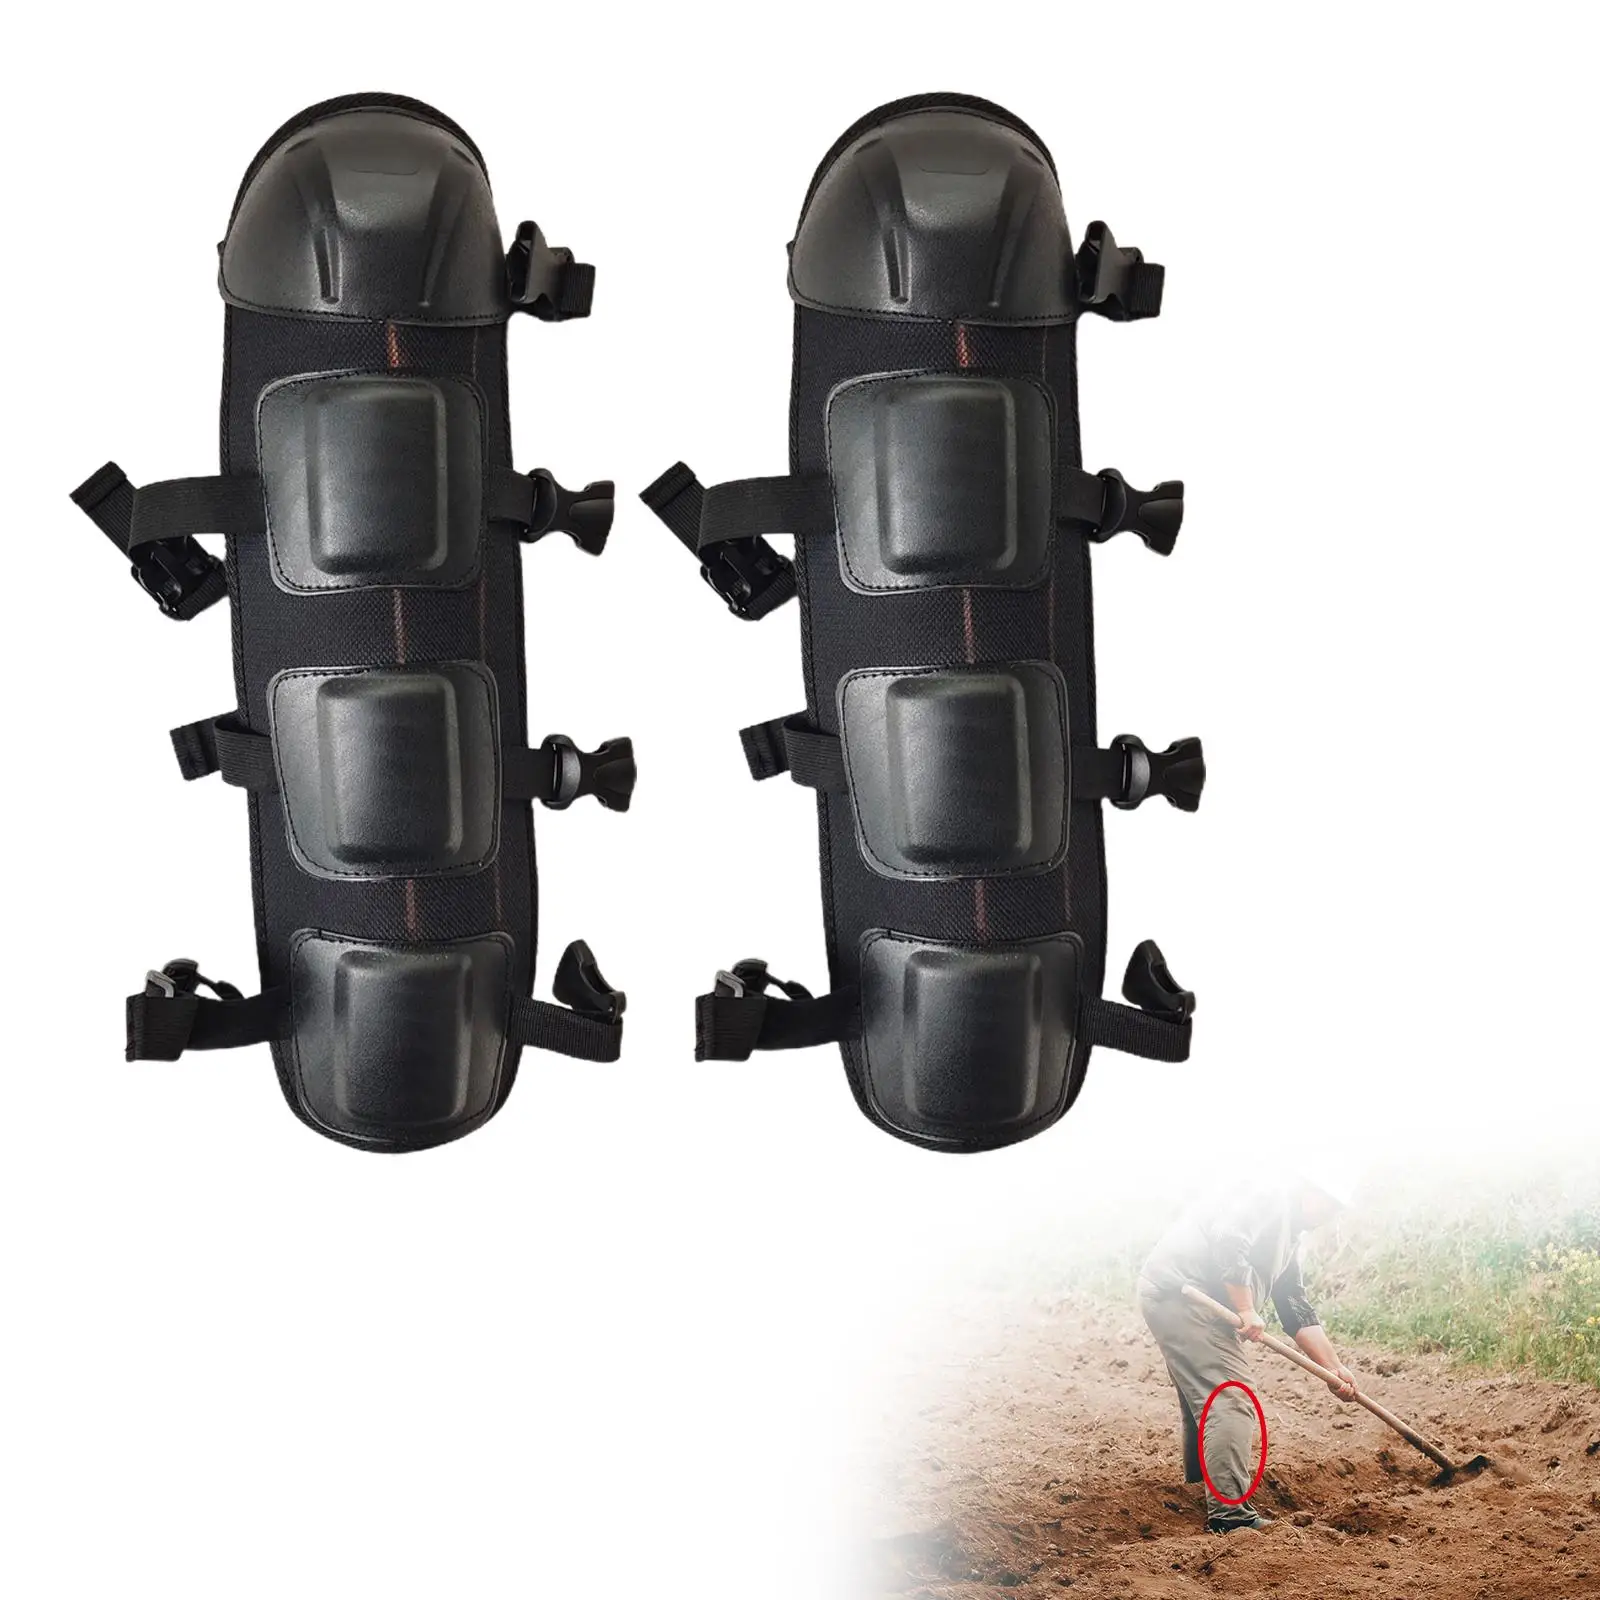 Knee Pads Kneelet Protective Gear Chain Saw Shin Guards for Garden Cycling